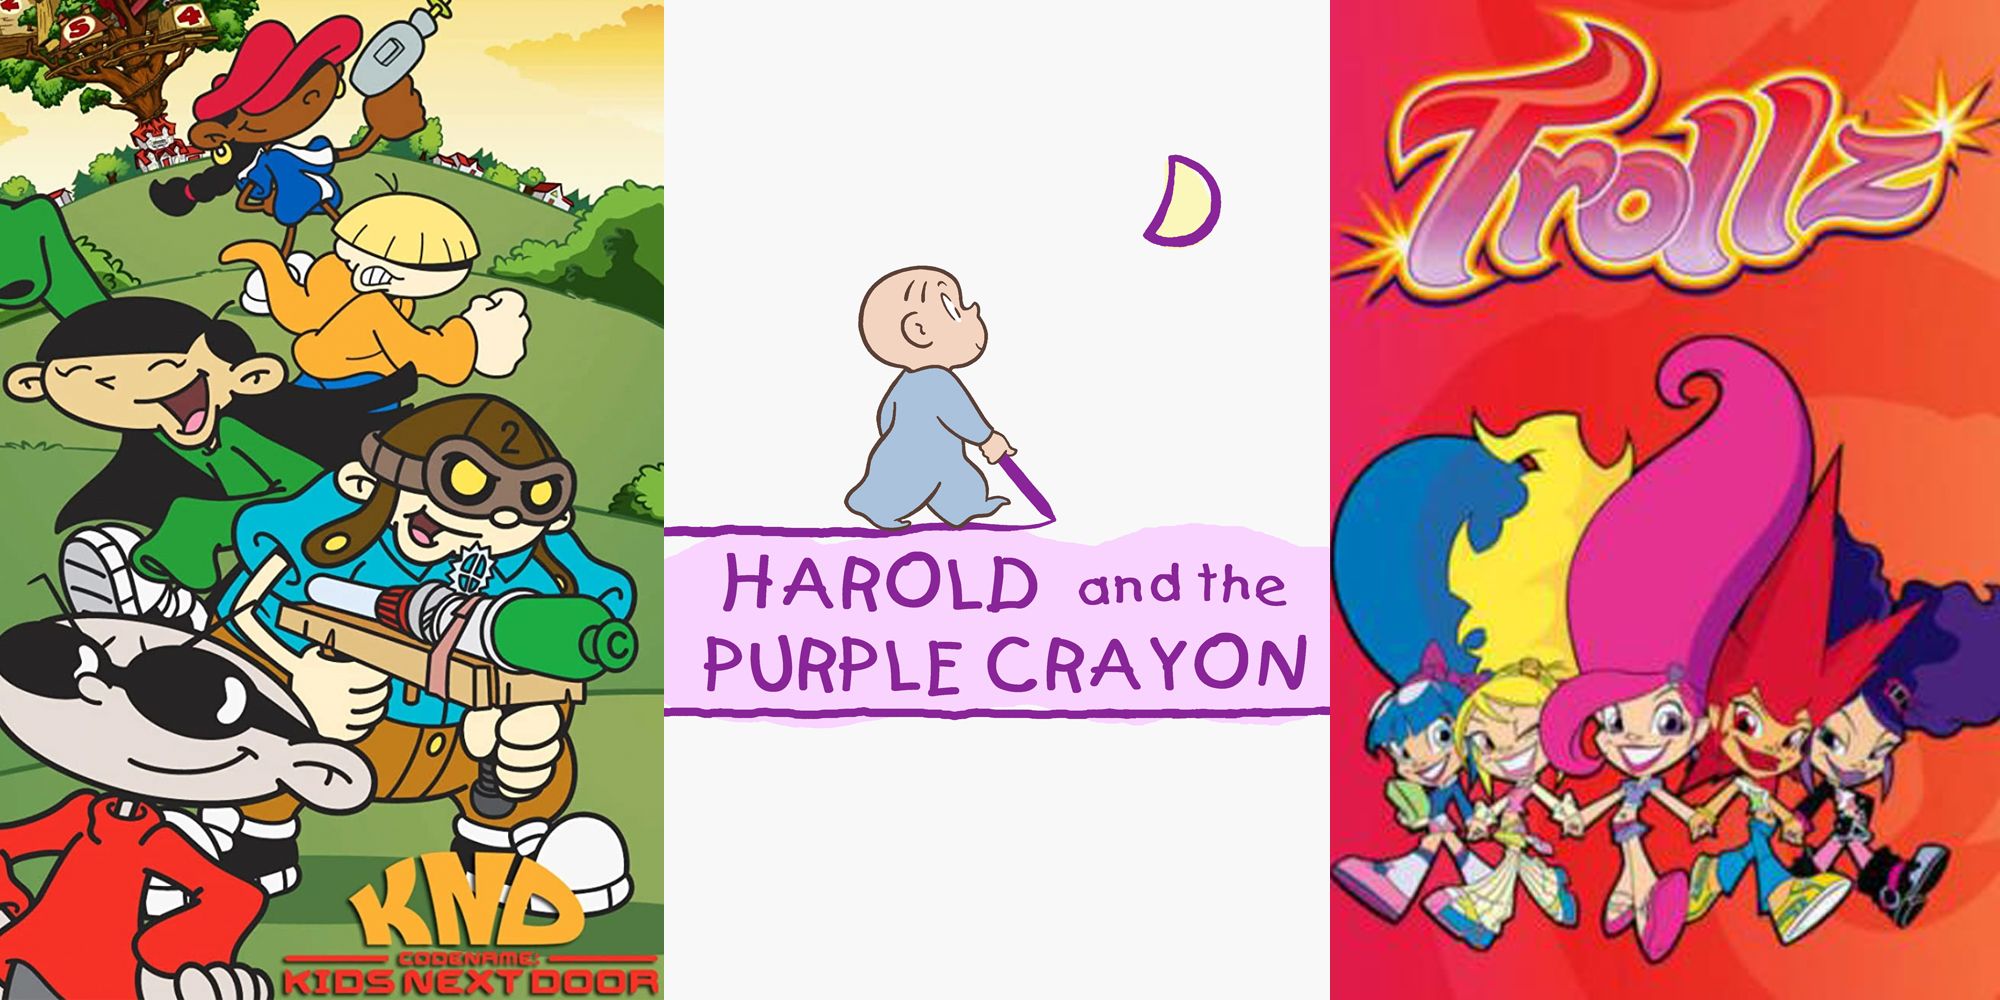 Title screen images from Codename: Kids Next Door, Harold and the Purple Crayon, and Trollz.